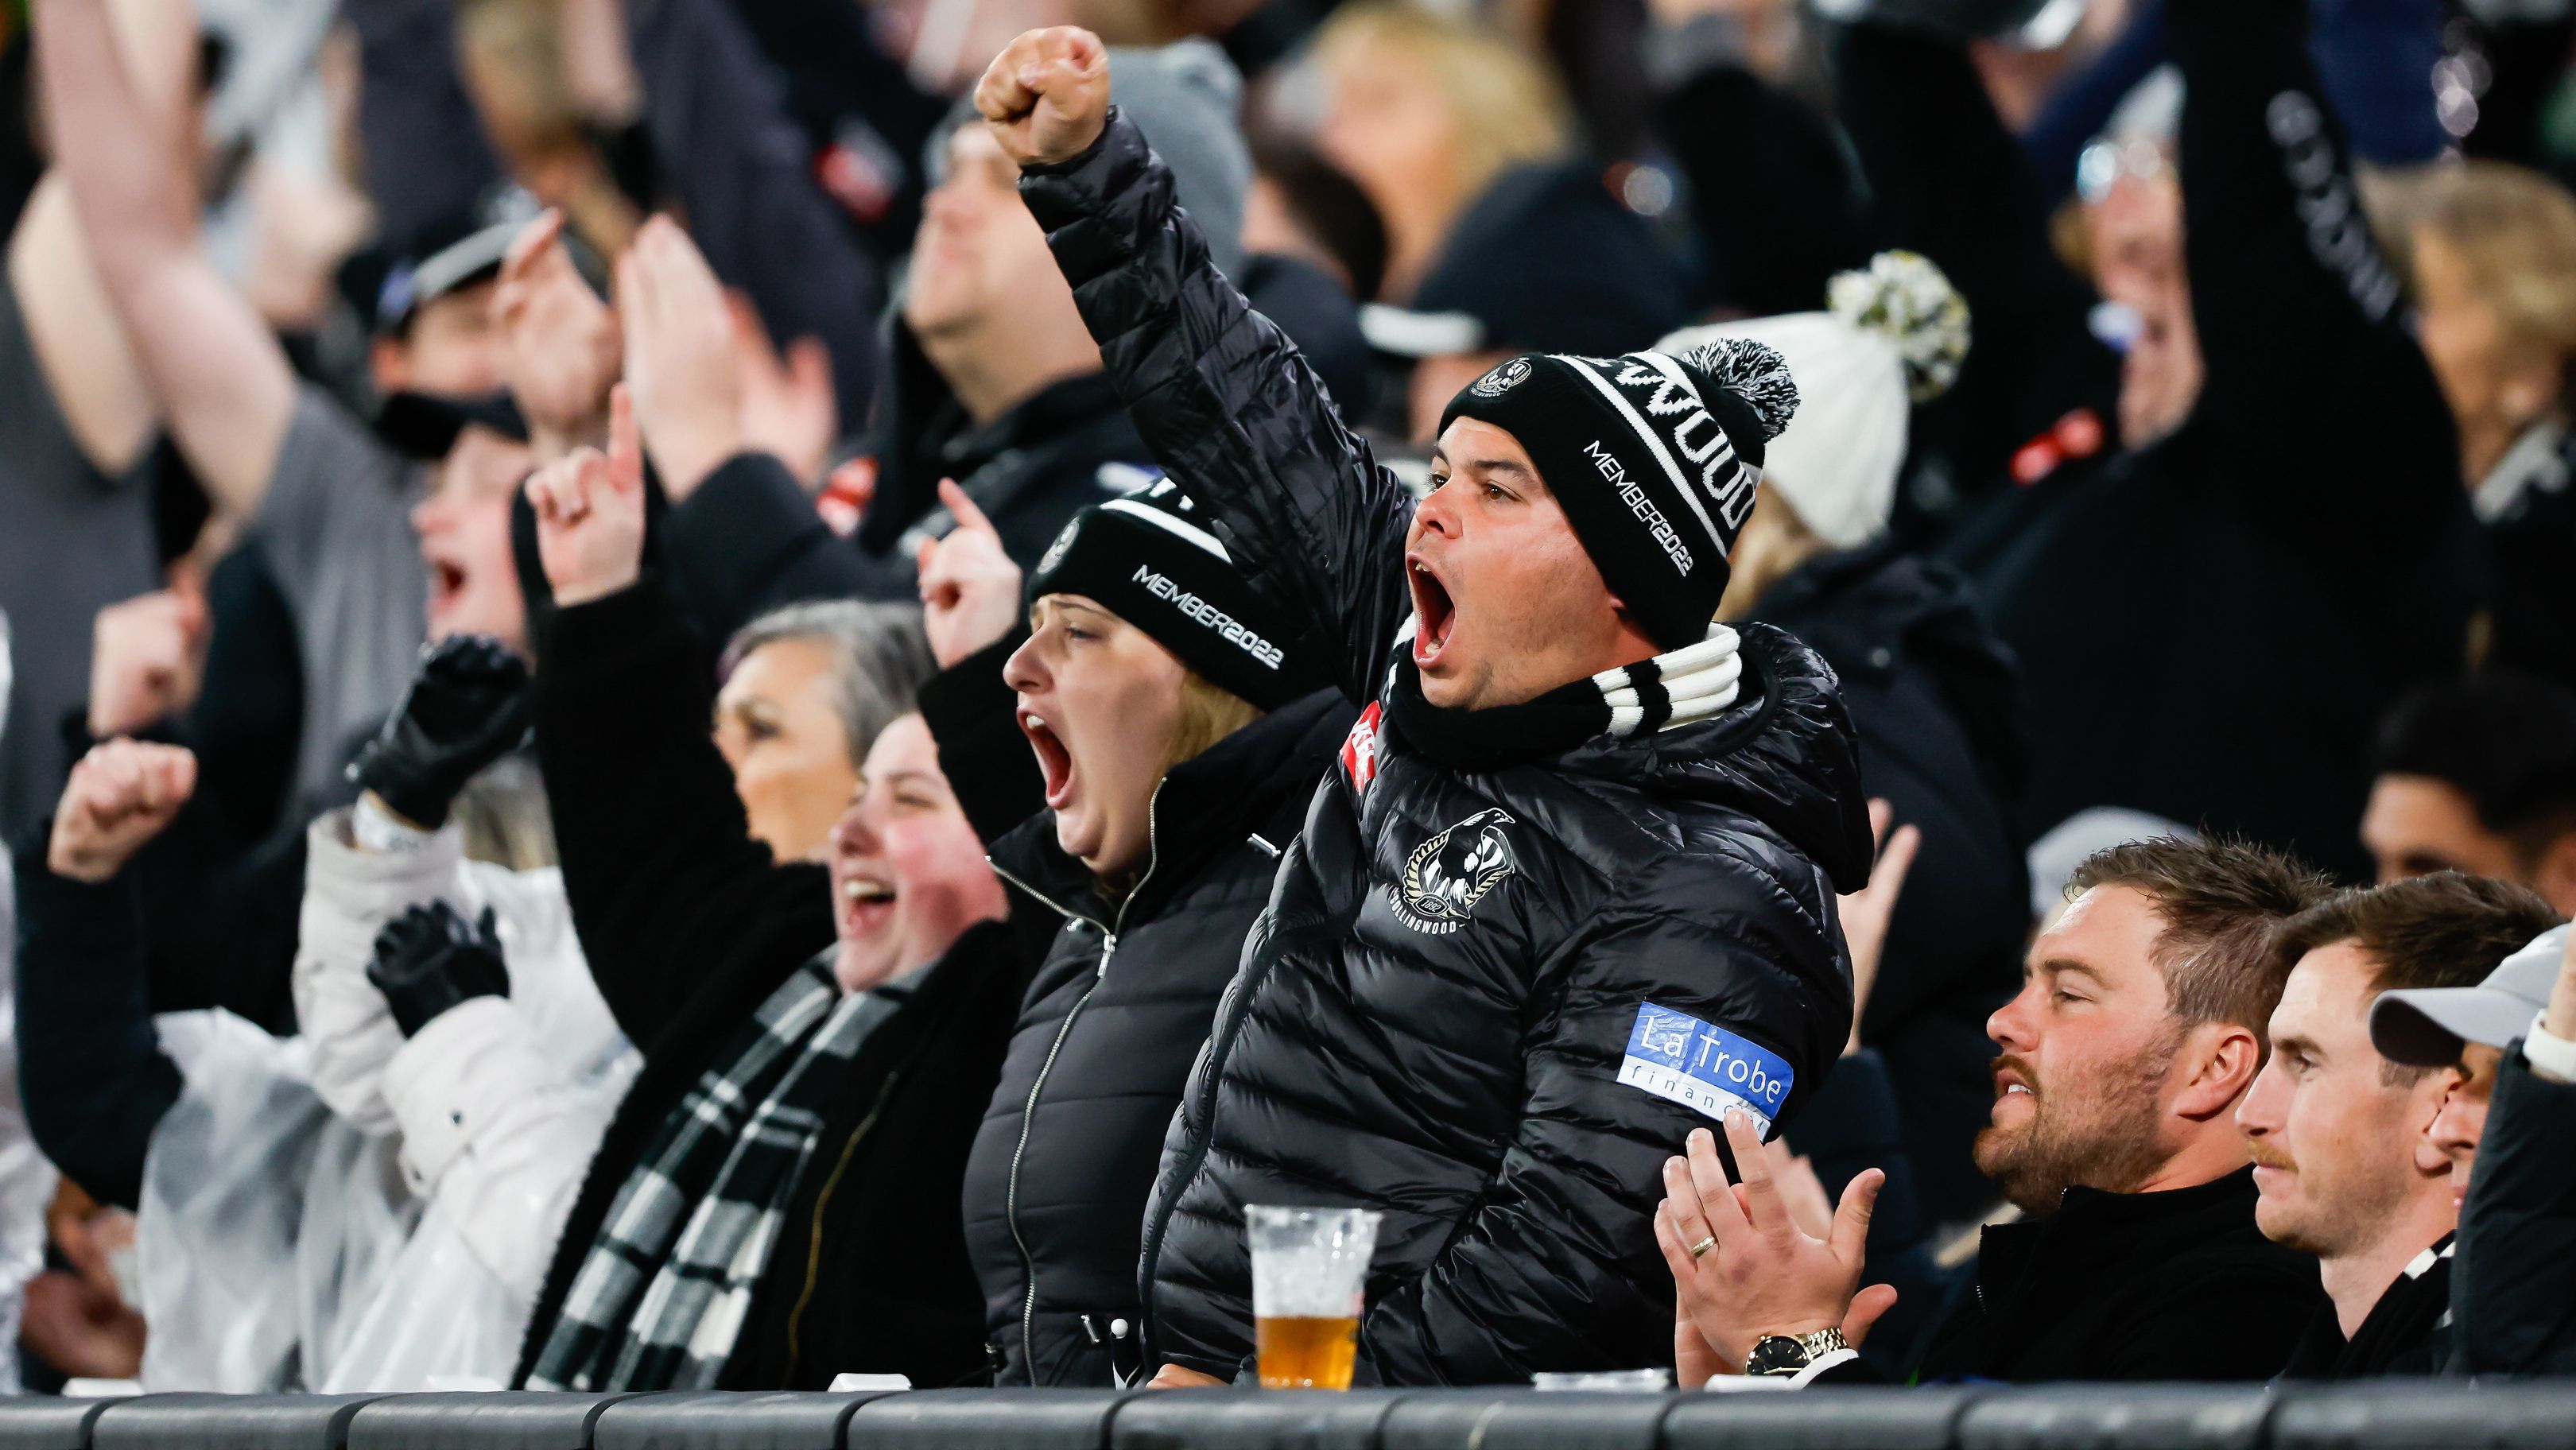 MELBOURNE, AUSTRALIA - SEPTEMBER 07: Collingwood fans celebrate during the 2023 AFL First Qualifying Final match between the Collingwood Magpies and the Melbourne Demons at Melbourne Cricket Ground on September 07, 2023 in Melbourne, Australia. (Photo by Dylan Burns/AFL Photos via Getty Images)